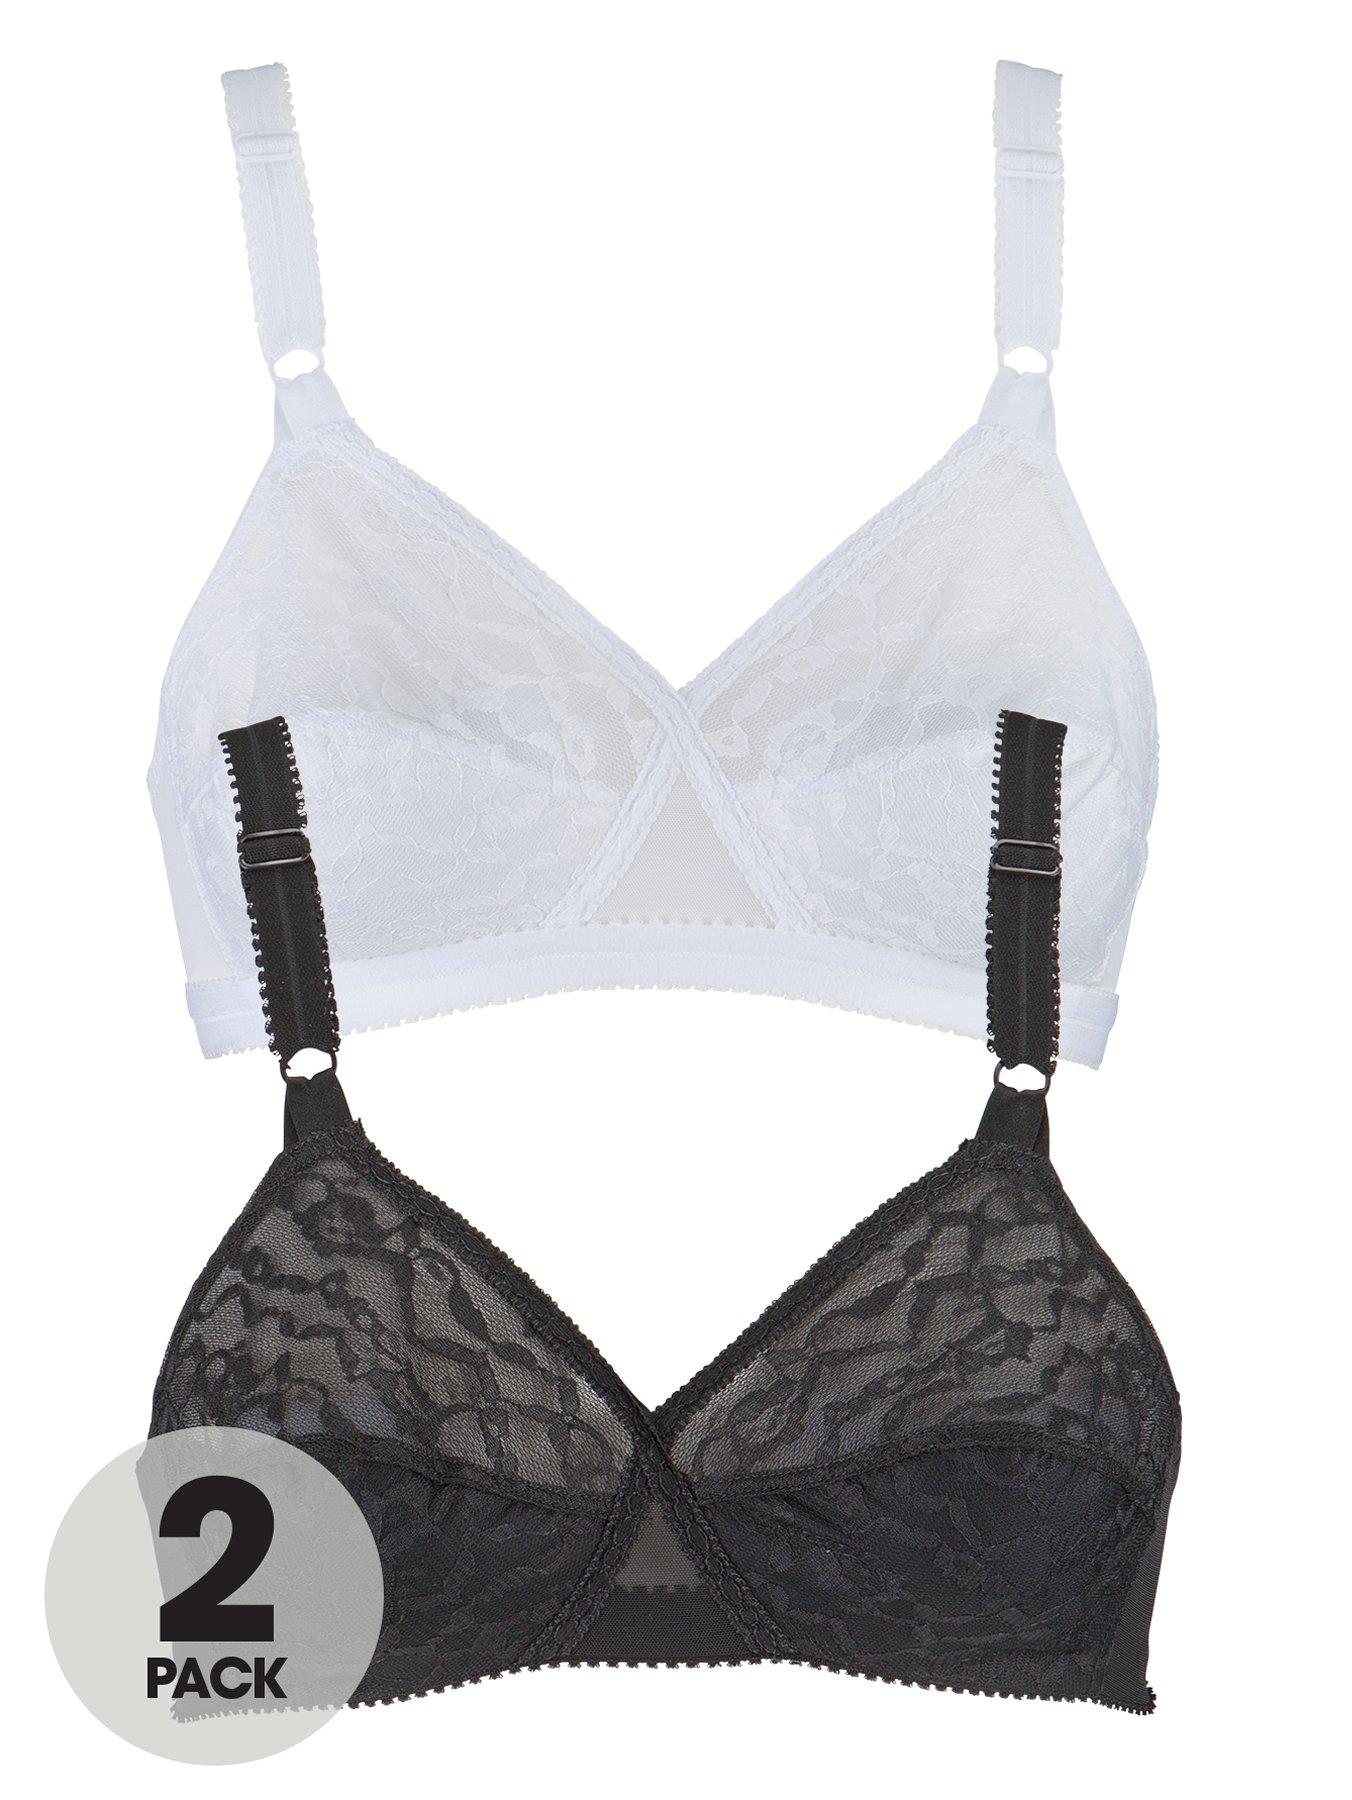 Pack of 2 Playtex Cross Your Heart Lace Bras - Bra 